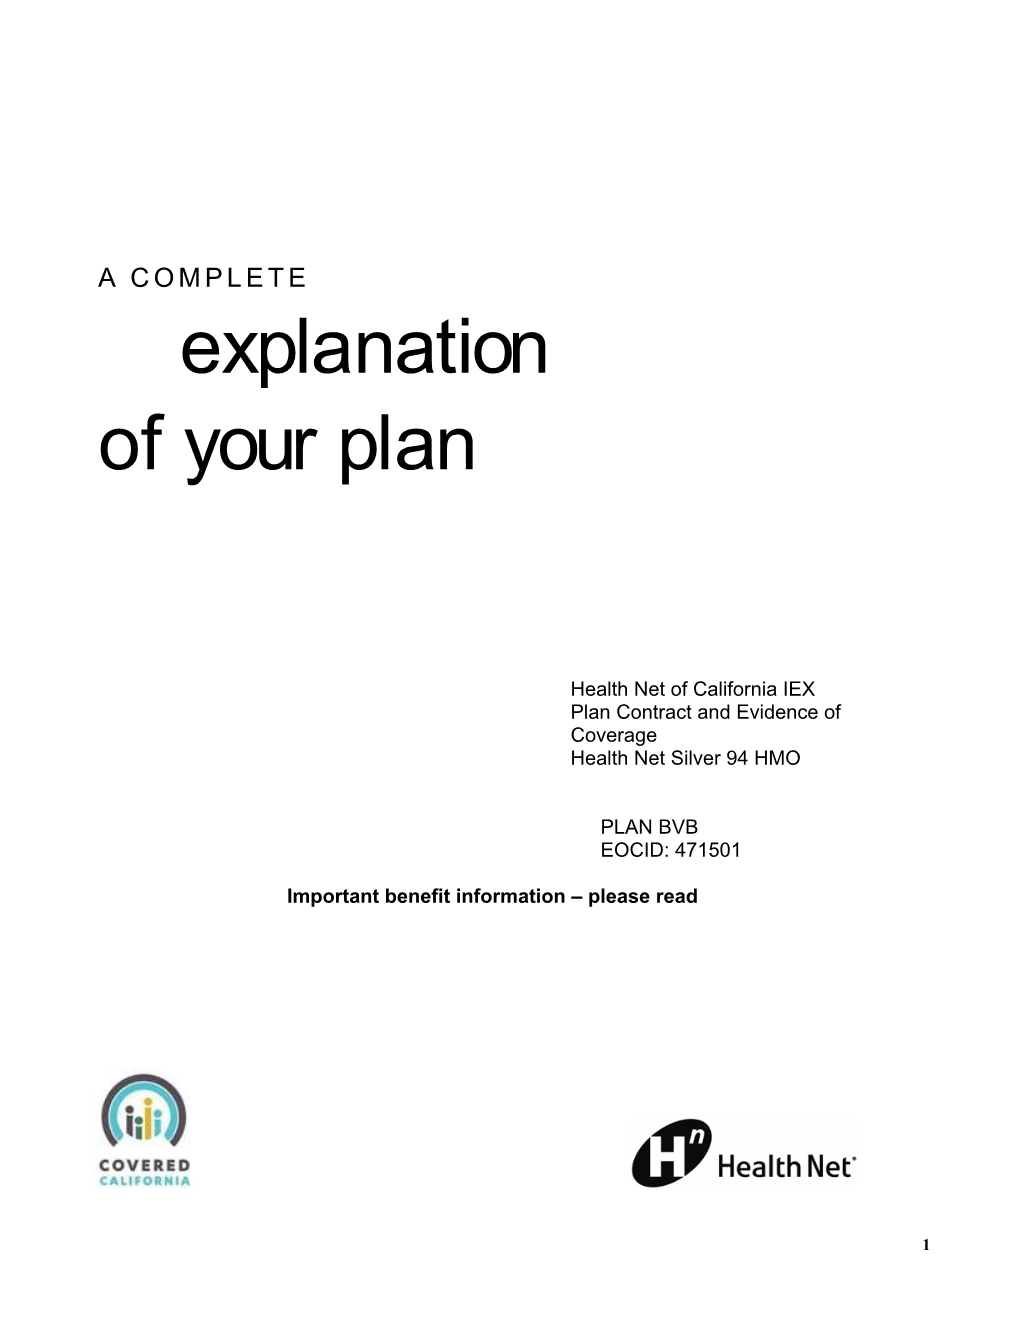 Explanation of Your Plan